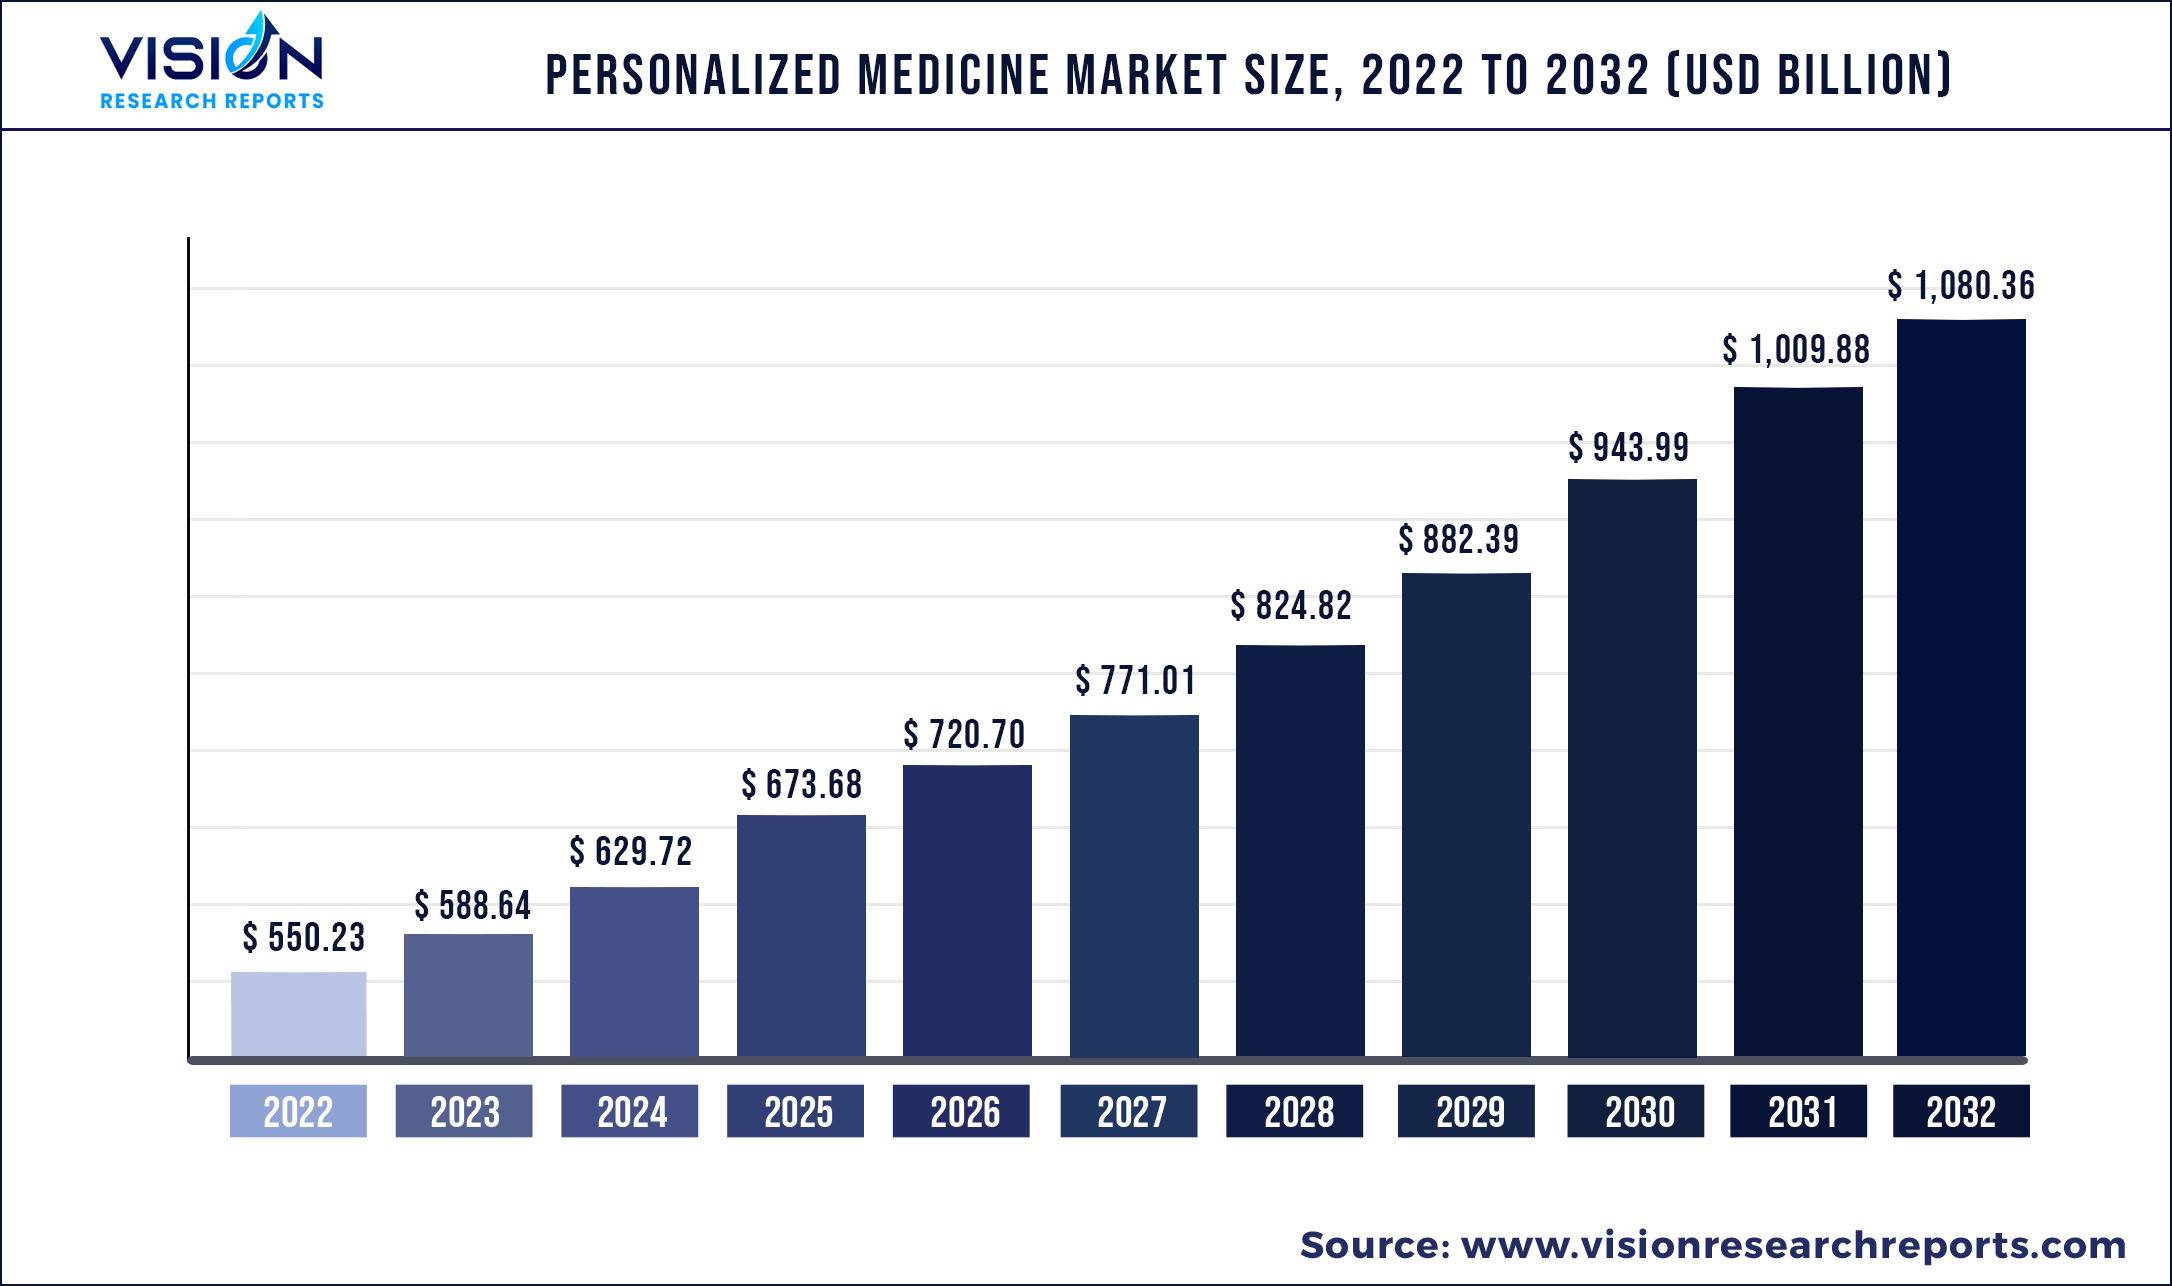 Personalized Medicine Market Size 2023 to 2032